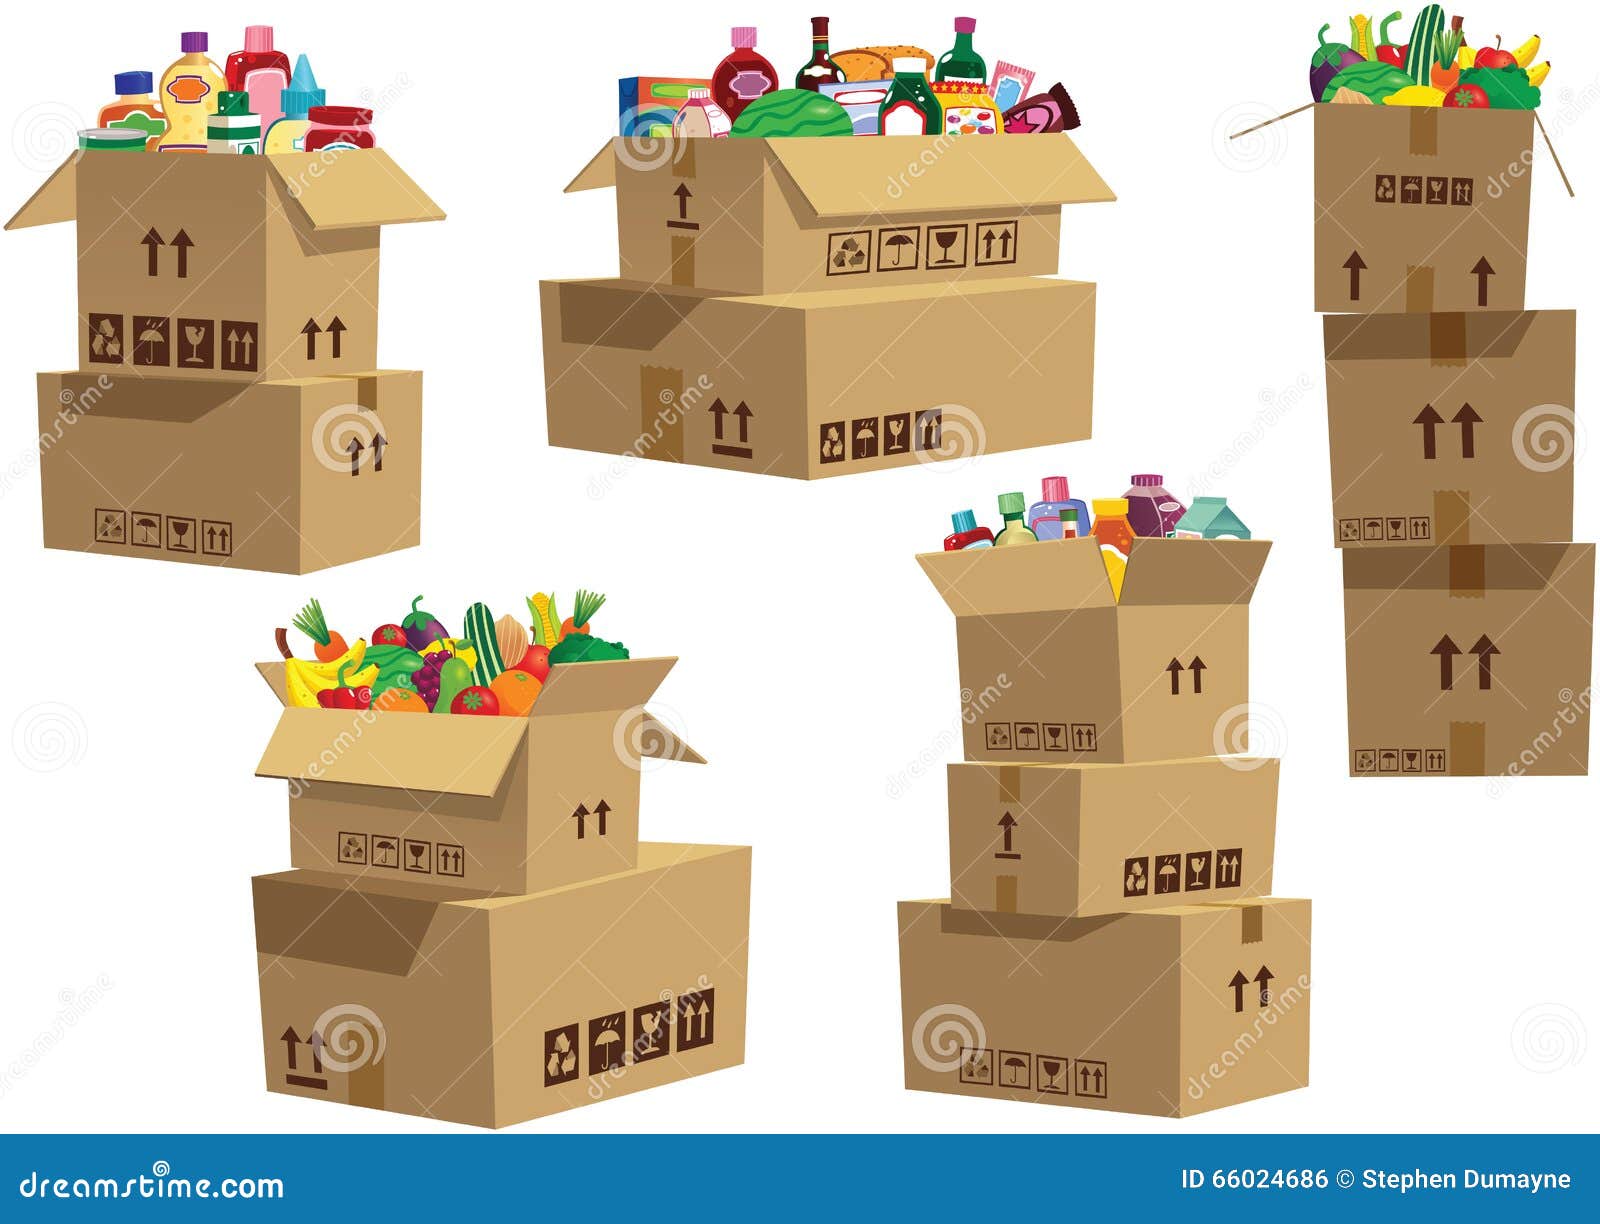 cardboard boxes stacked with goods